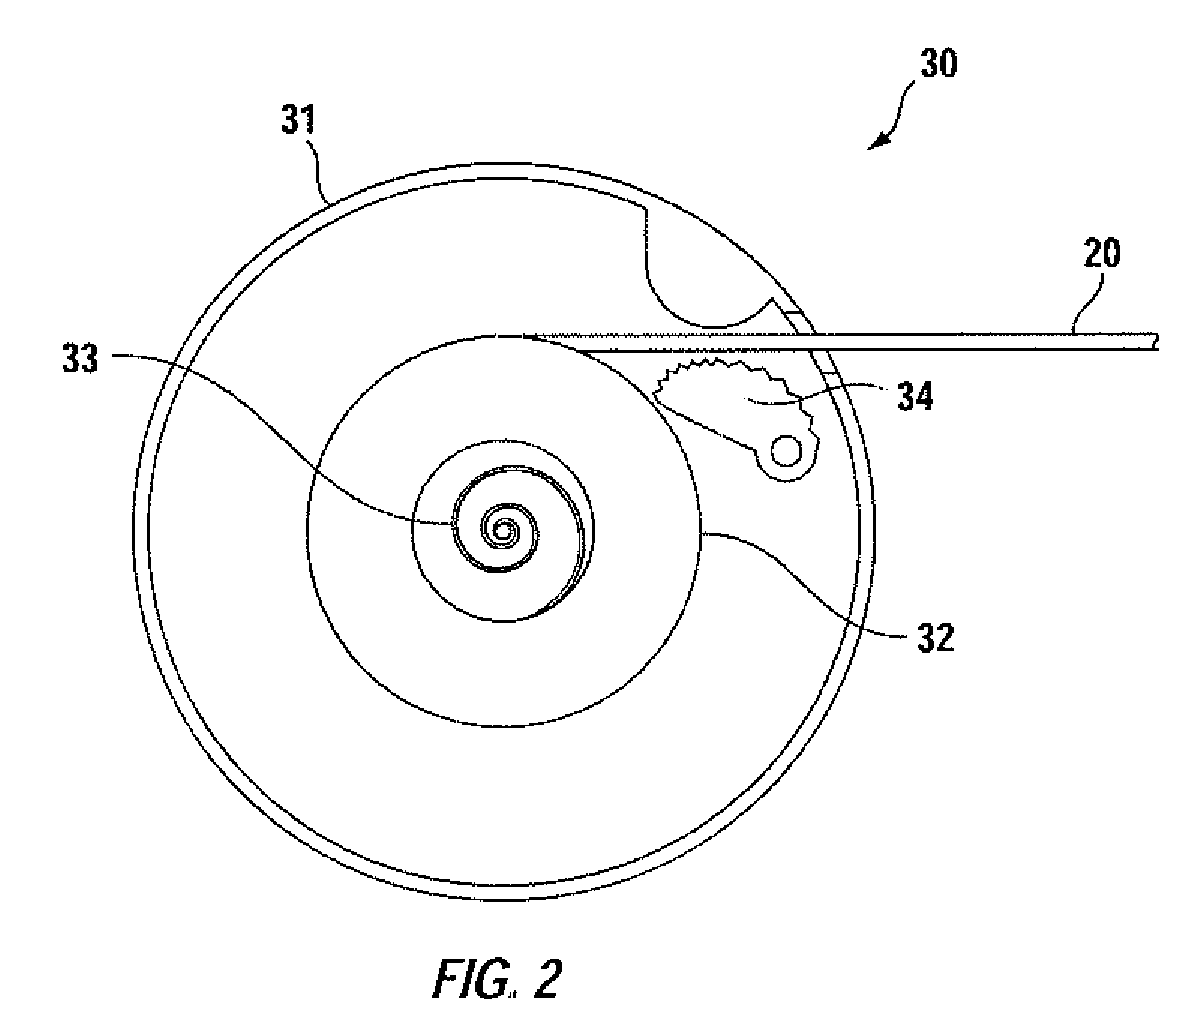 Eye and ear protection device